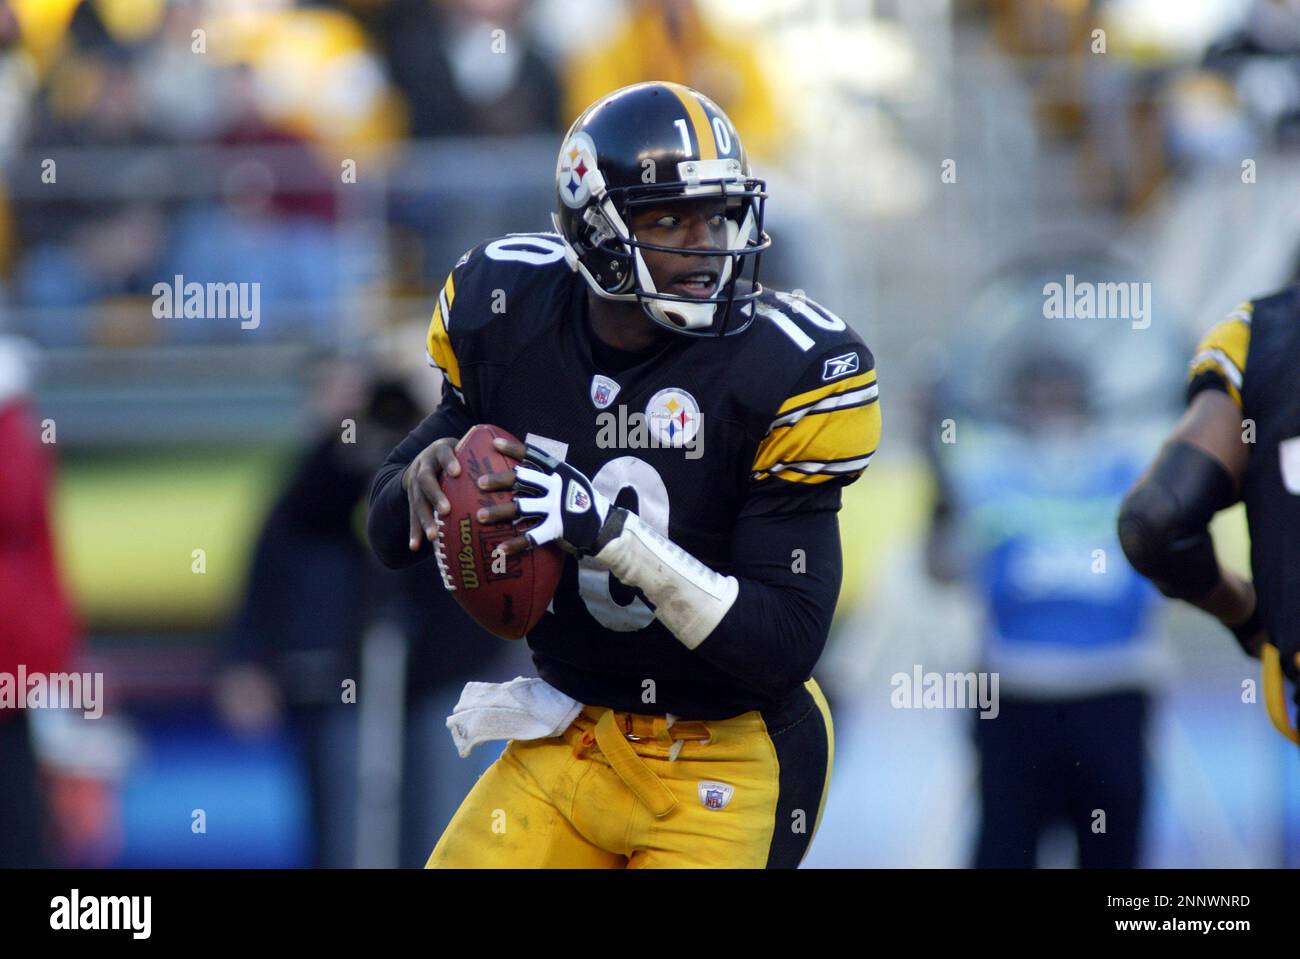 24 Nov 2002: Kordell Stewart of the Pittsburgh Steelers during the Steelers  29-21 victory over the Cincinnati Bengals at Heinz Field in Pittsburgh, PA.  (Icon Sportswire via AP Images Stock Photo - Alamy